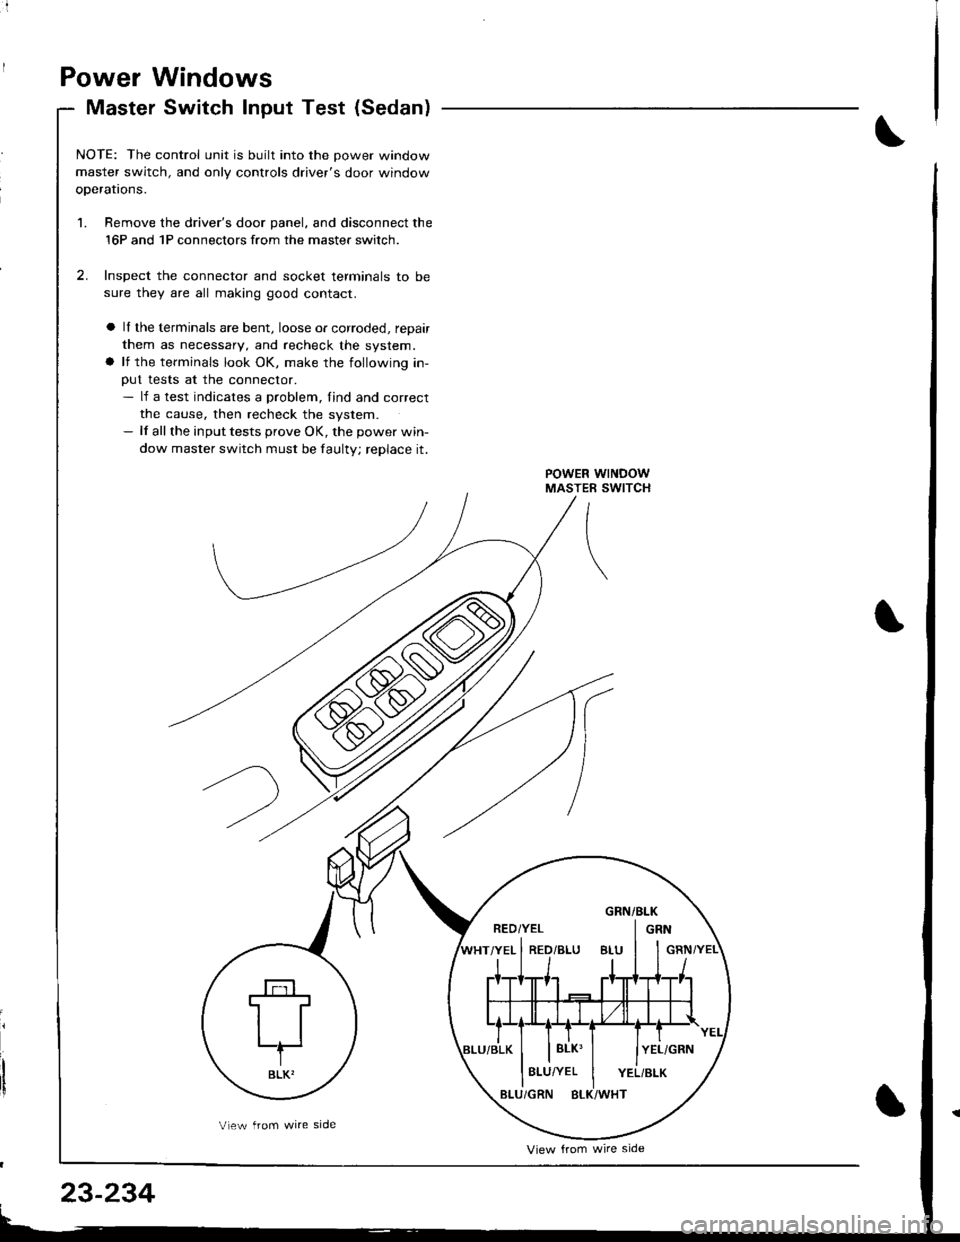 HONDA INTEGRA 1998 4.G Workshop Manual i
Power Windows
Master Switch Input Test (Sedan)
NOTE: The control unit is built into the Dower window
master switch, and only controls drivers door window
oDeratrons.
1. Bemove the drivers door pan